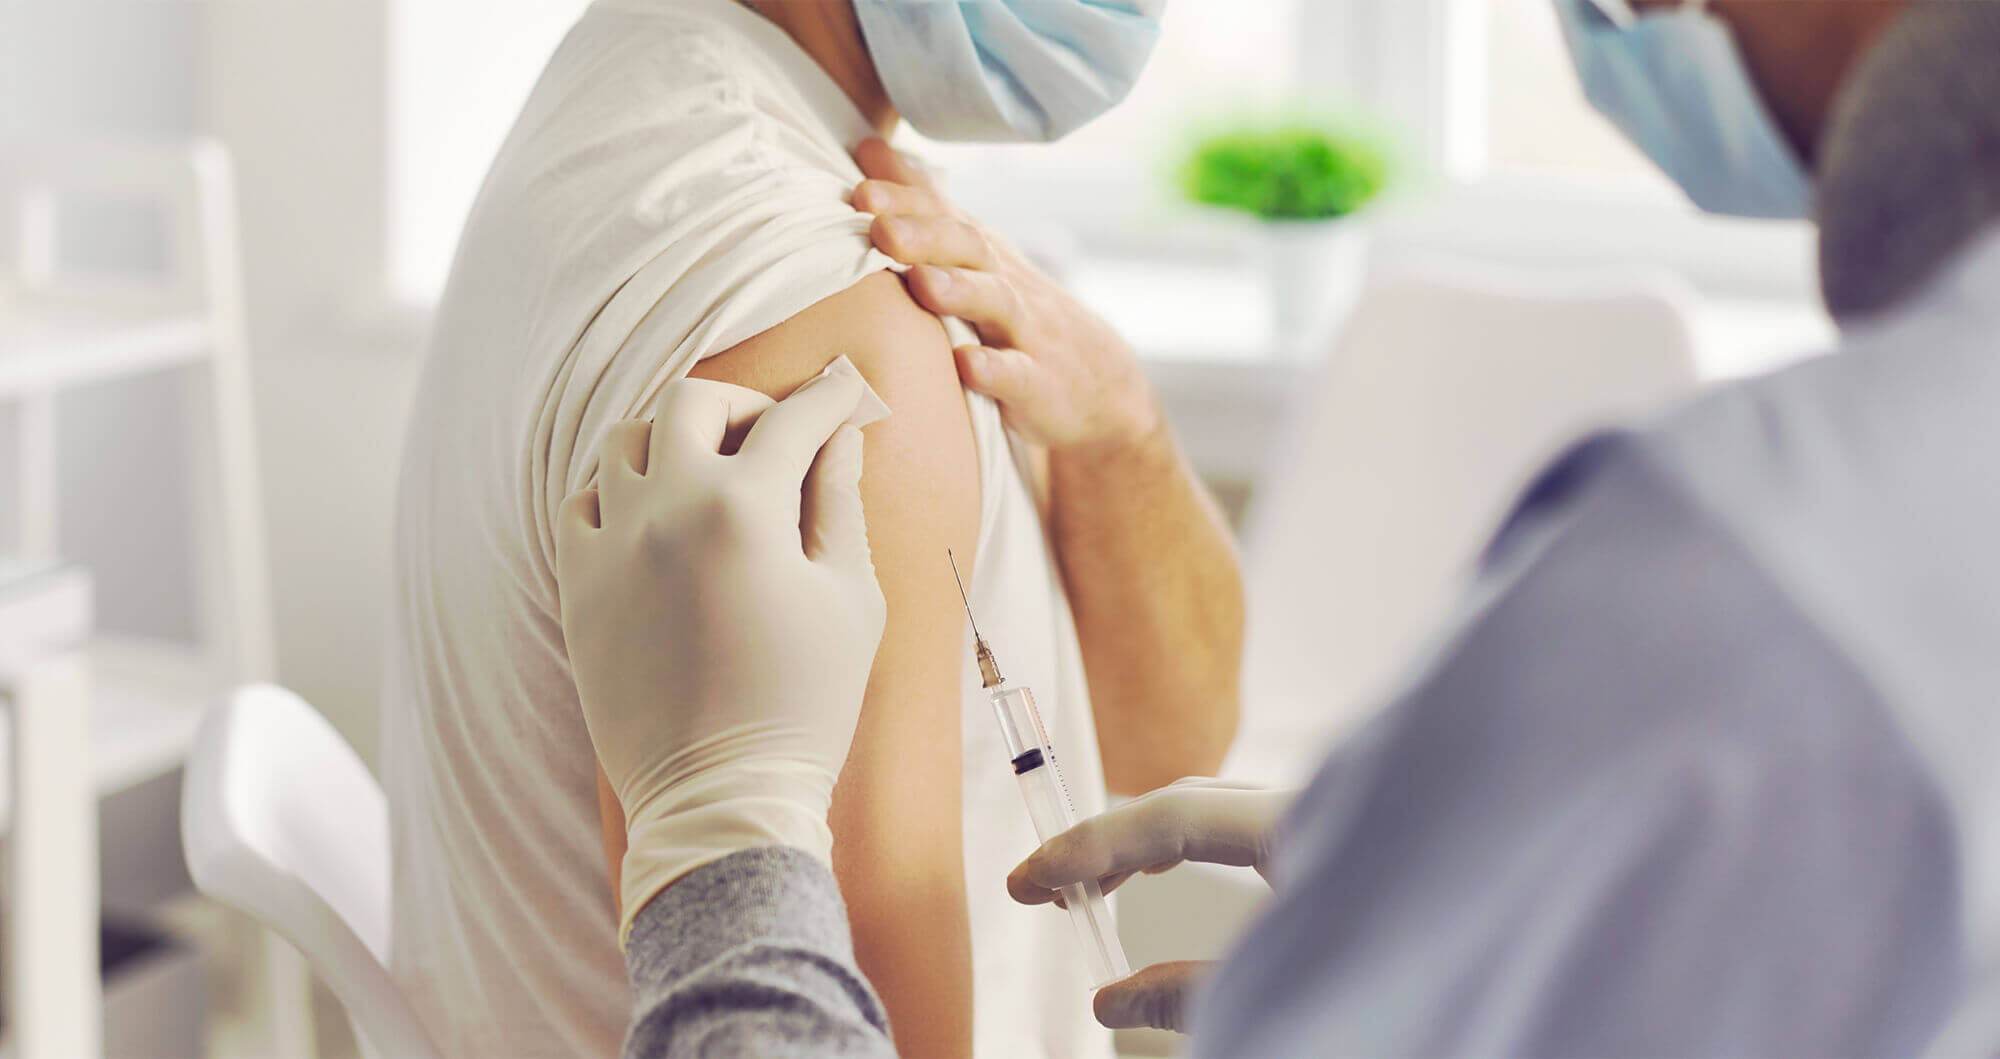 vaccination in the workplace being administered